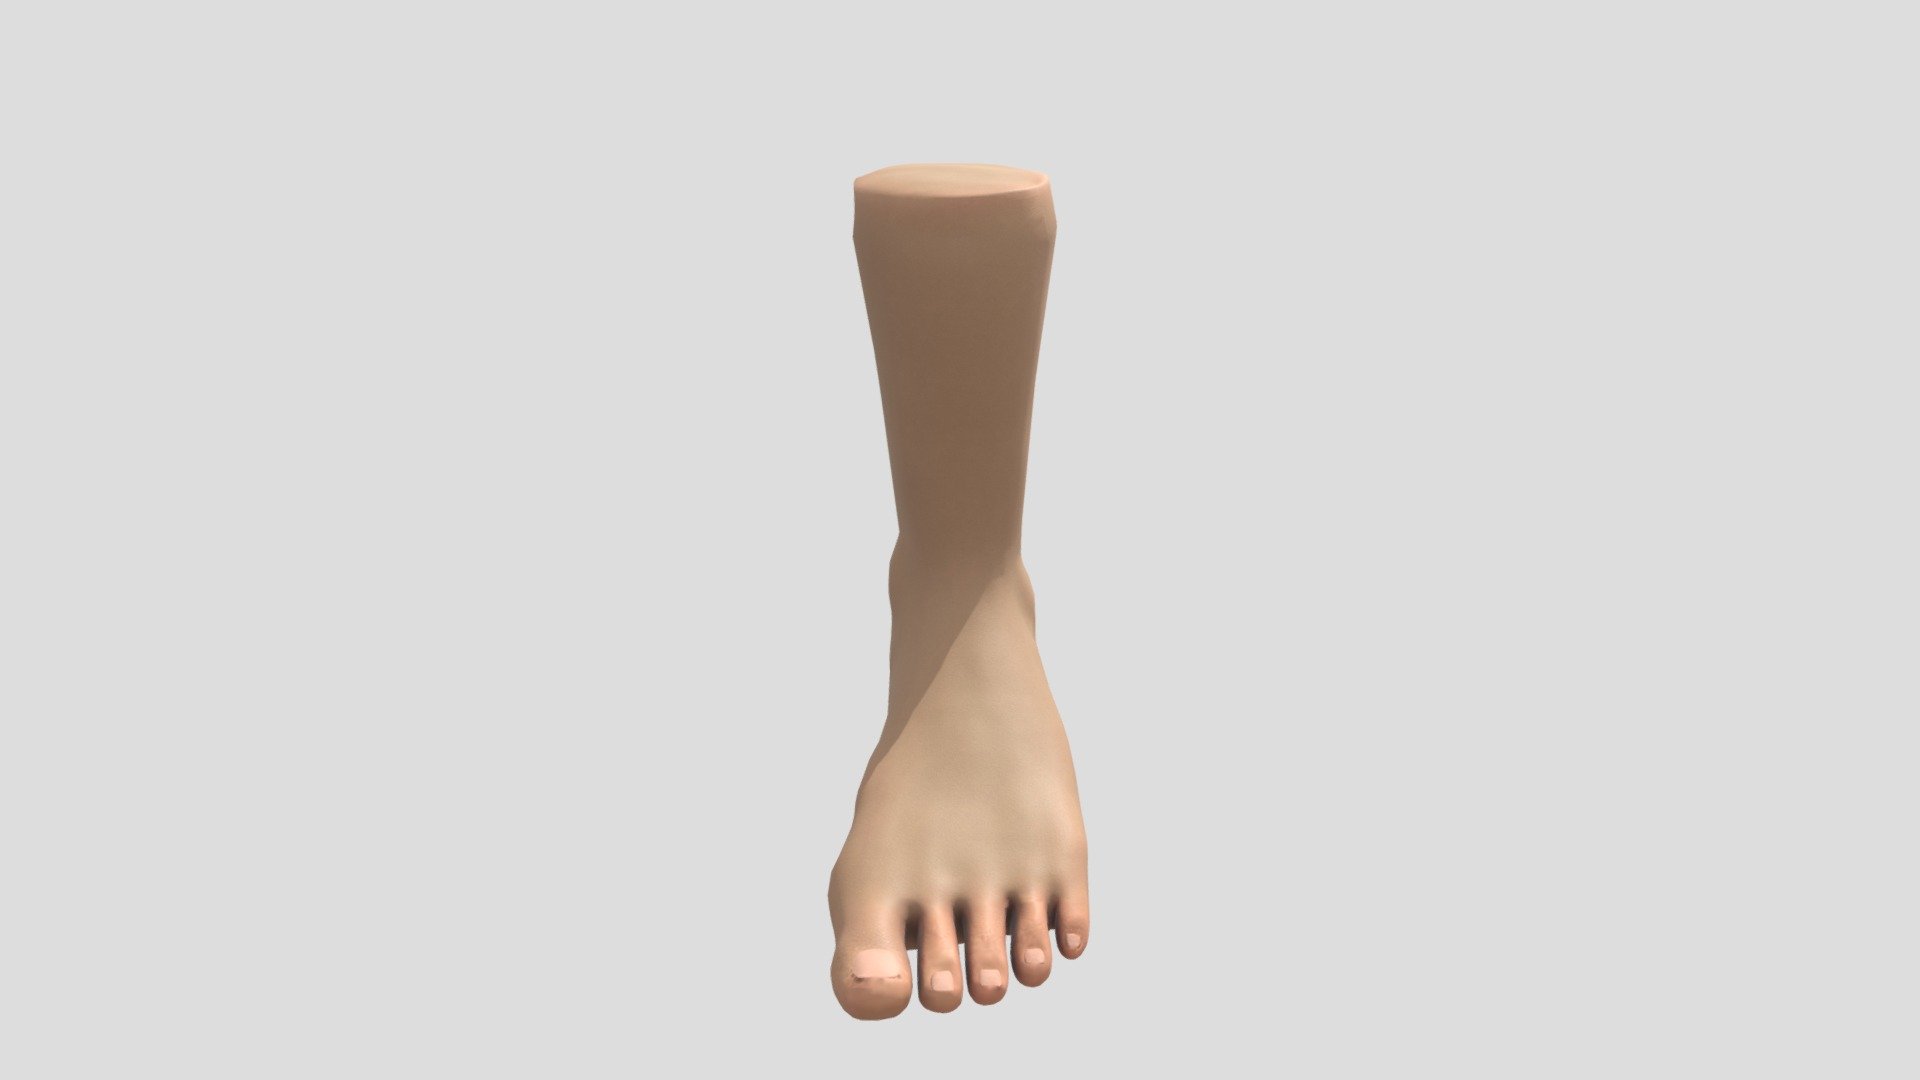 One of the 3 models I worked on as part of my 3D sculpting primer module. This is also my first attempt to sculpt, retopologise and texture a foot so it's very basic 3d model